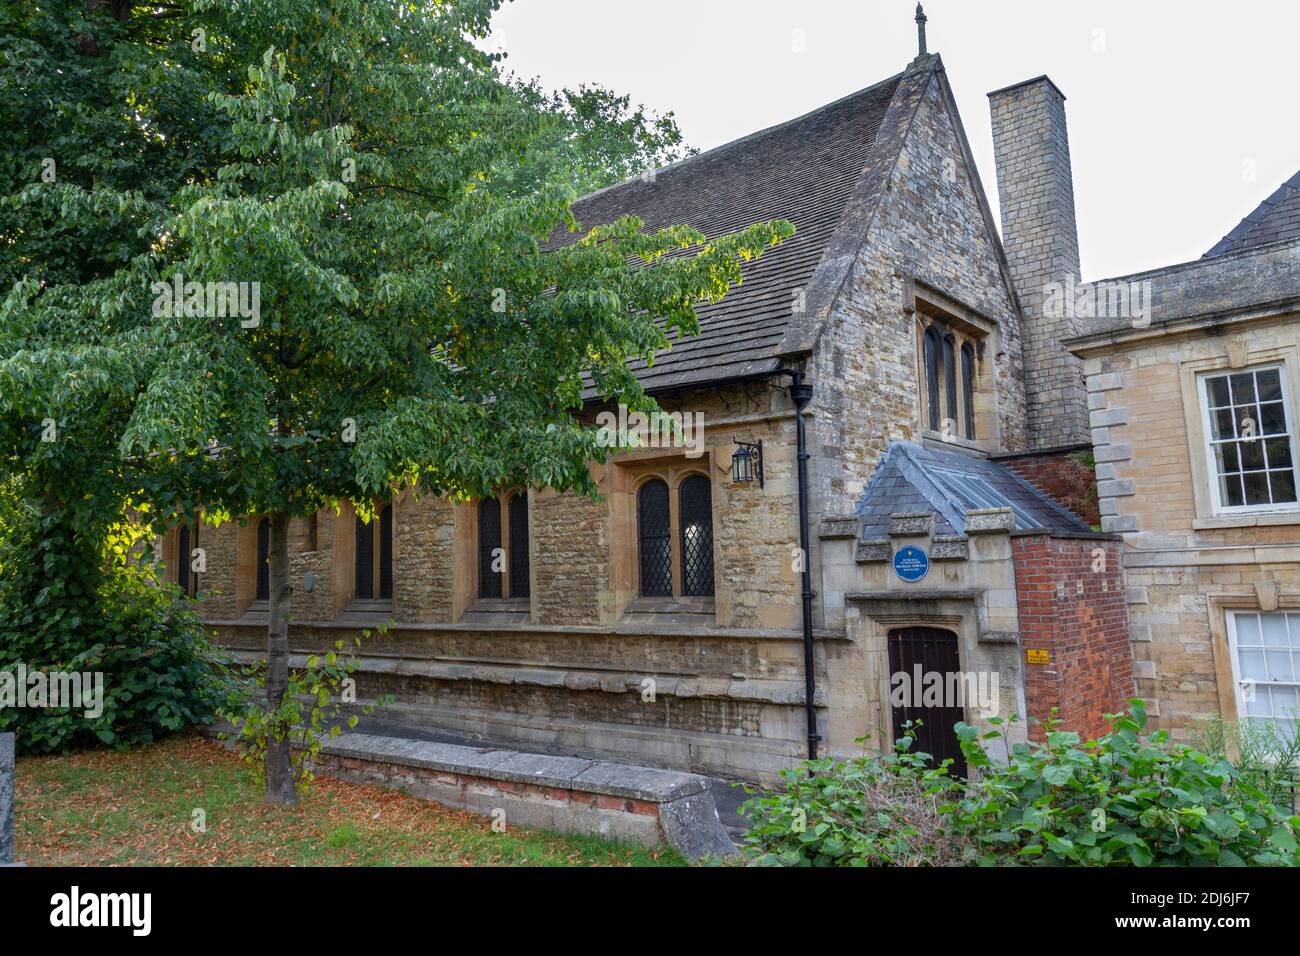 The Kings School hall, where Sir Isaac Newton was educated, Grantham, Lincolnshire, UK. Stock Photo